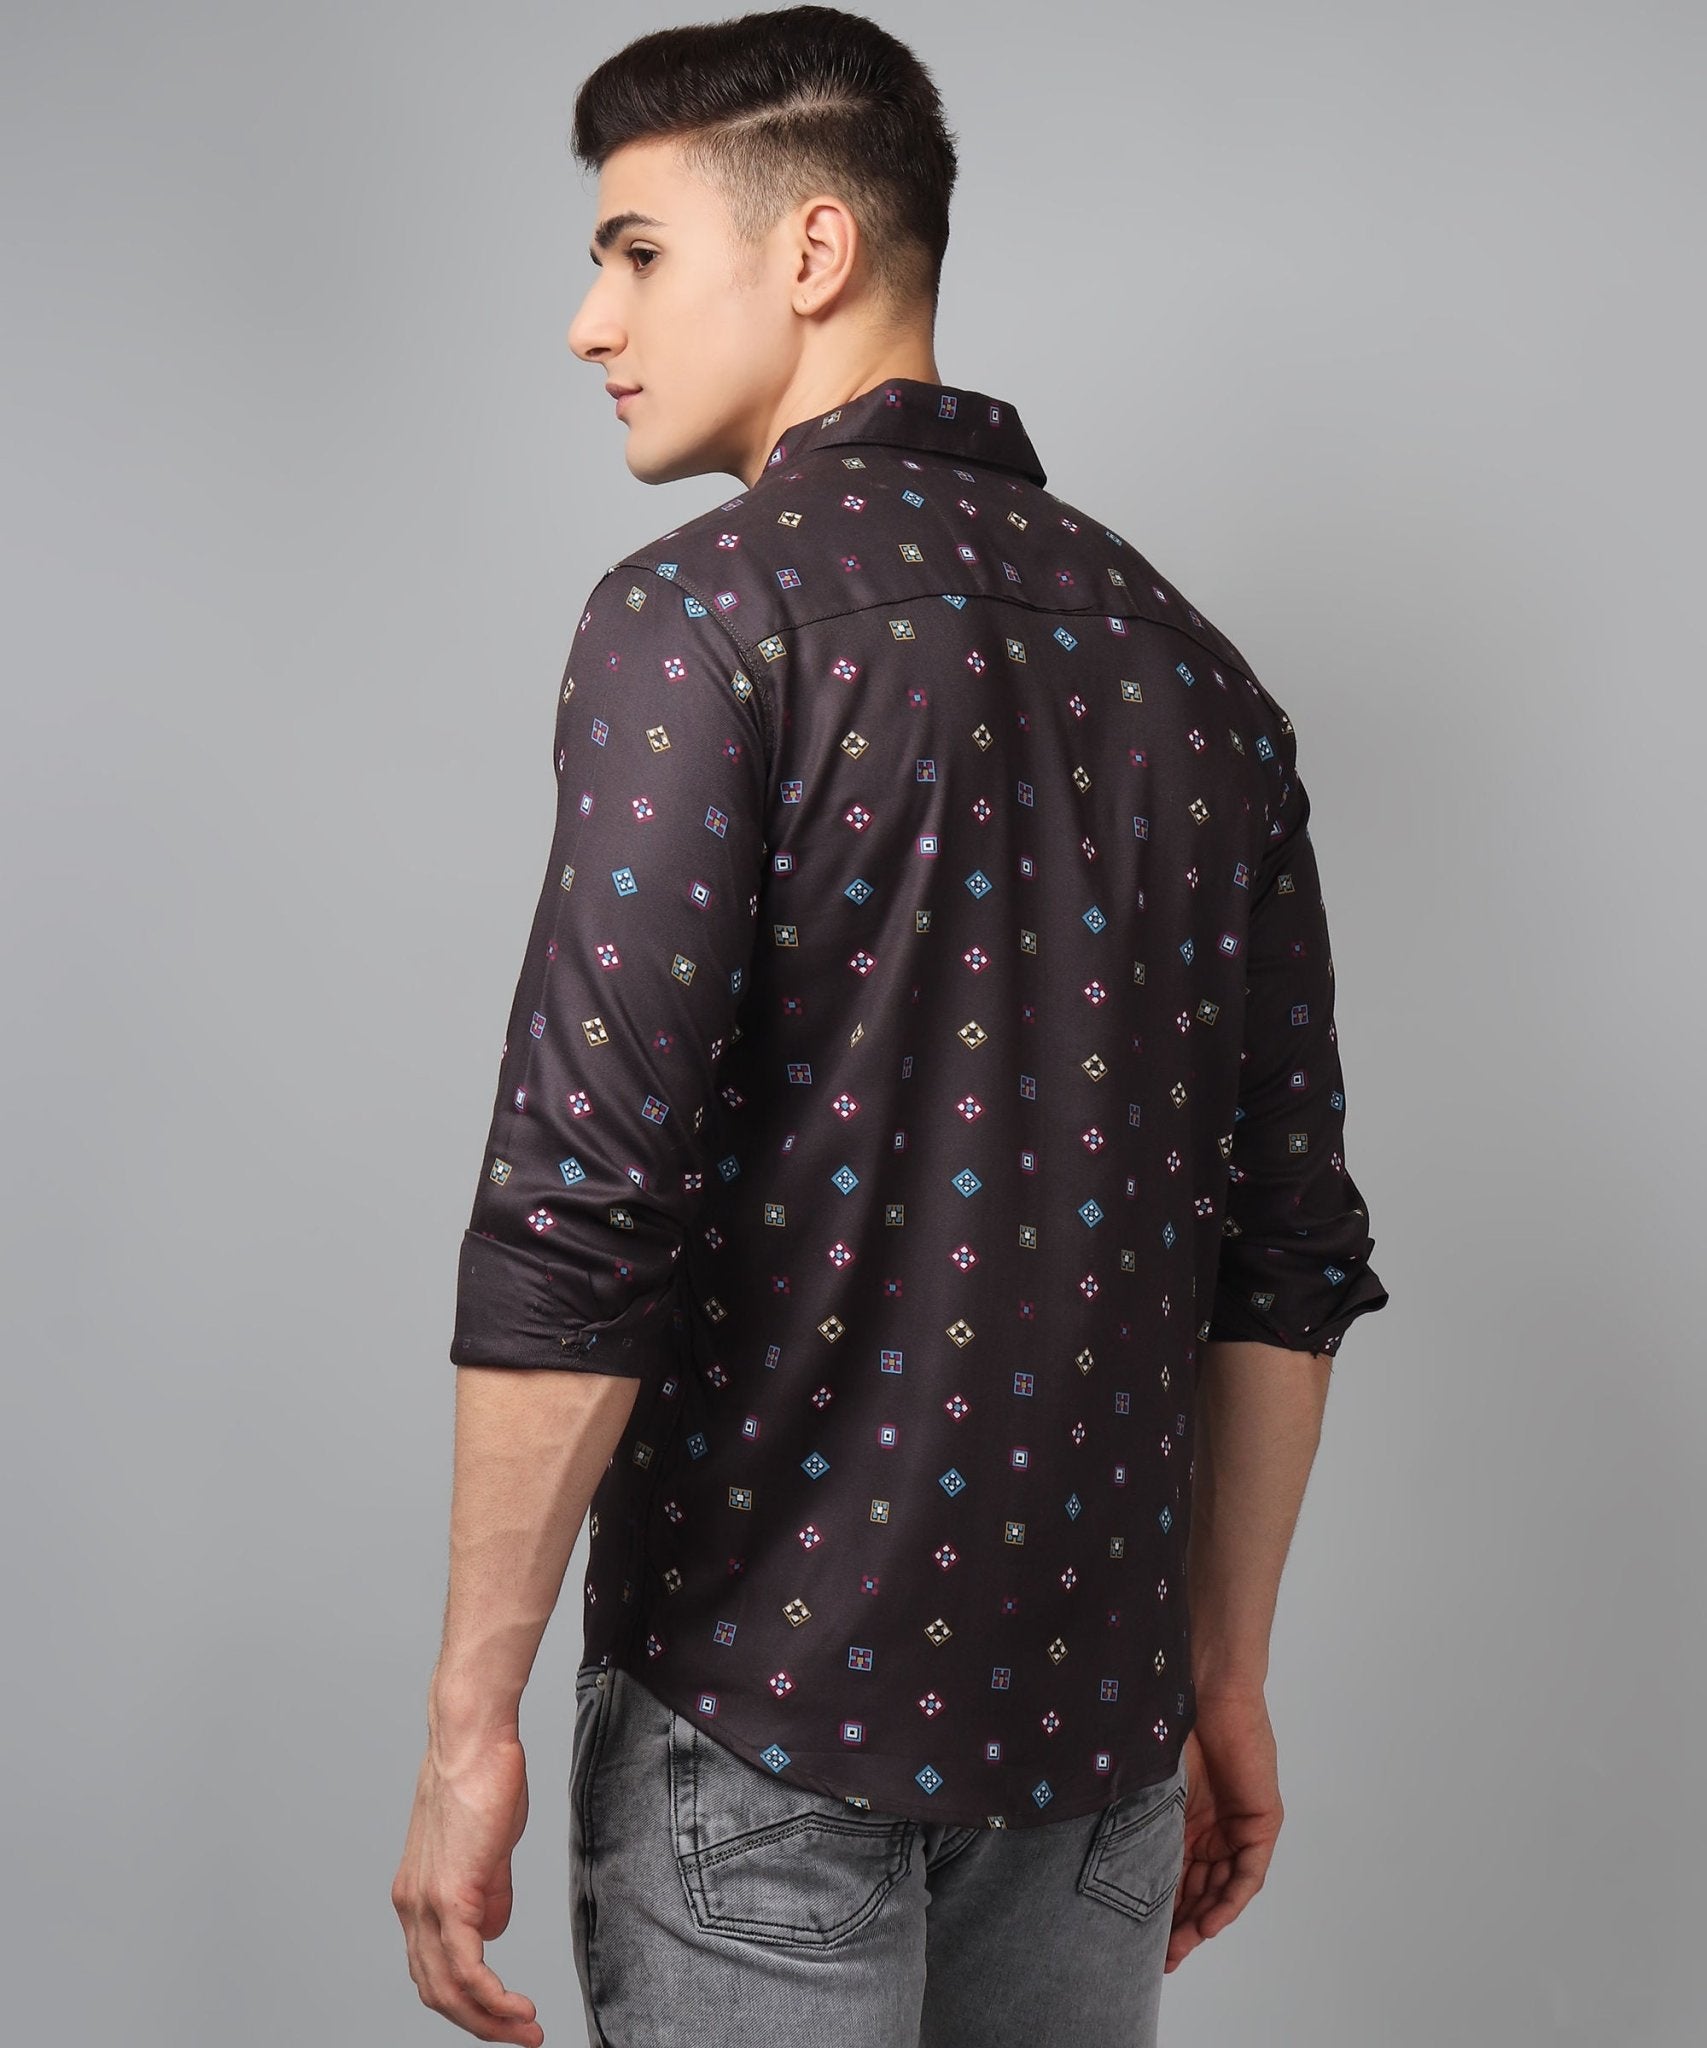 Fabulous Multi Colored Printed Cotton Casual Shirt for Men by Trybuy Premium - TryBuy® USA🇺🇸